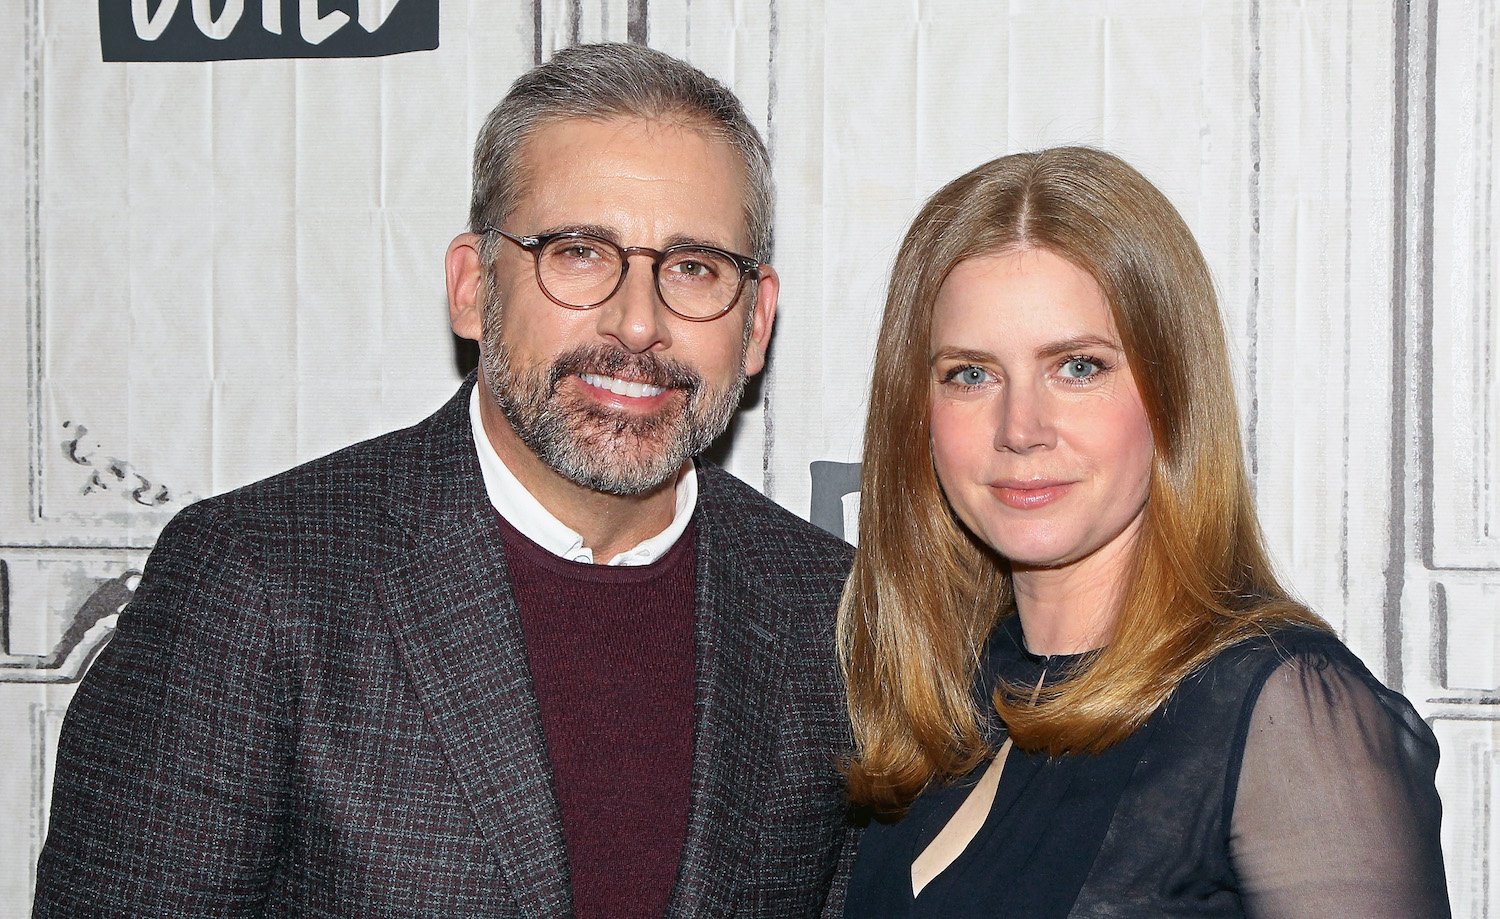 The Office star Steve Carell and Amy Adams attend the Build Series in 2018 to discuss the movie Vice